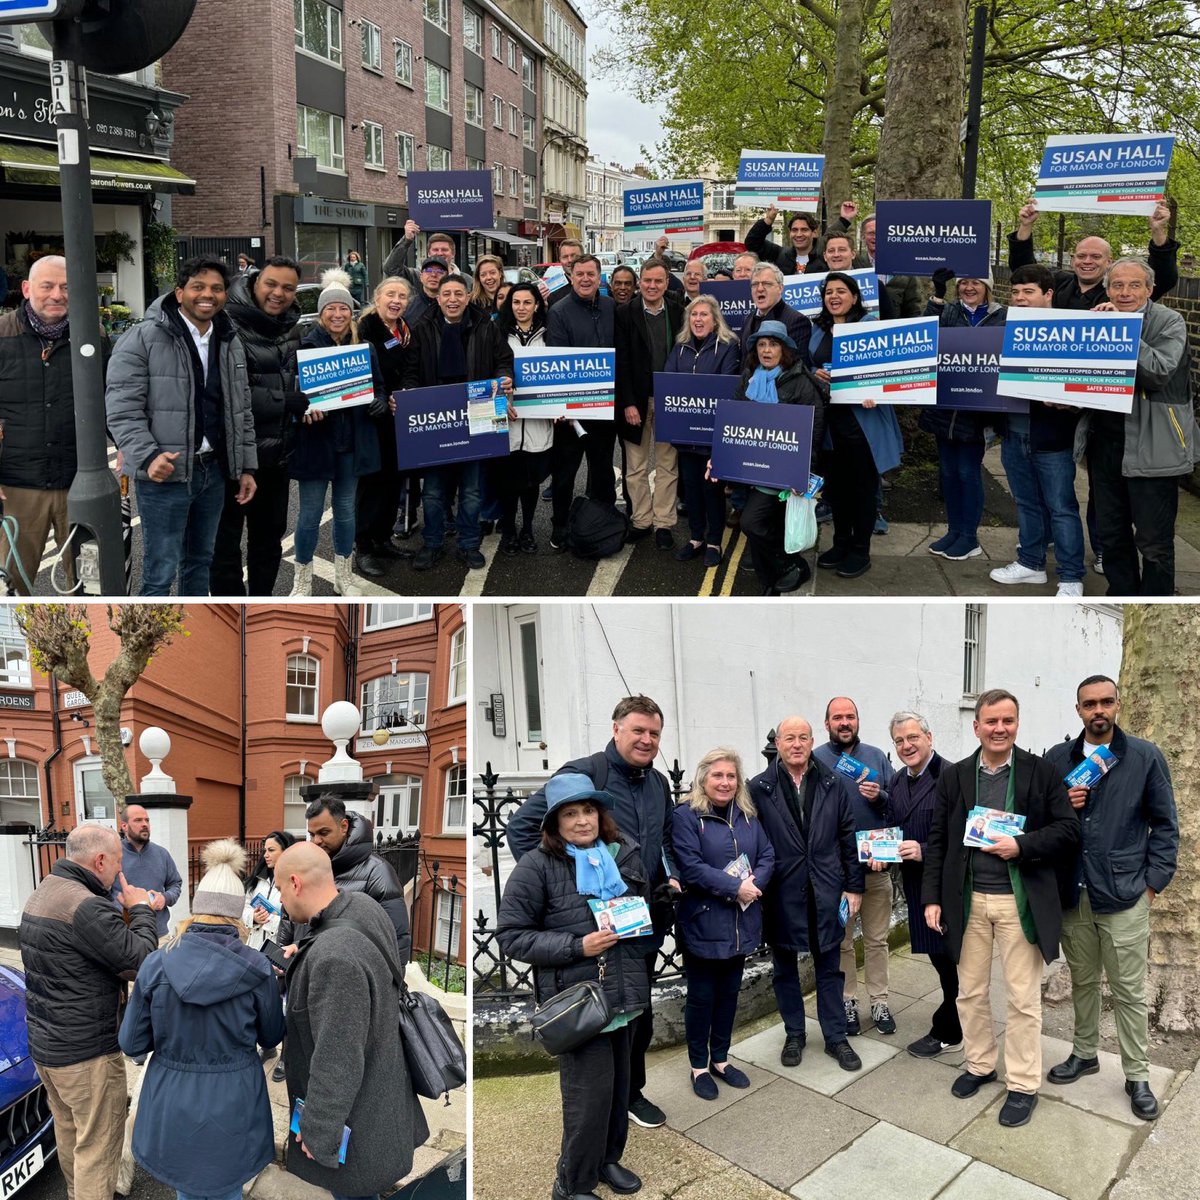 Huge gang out in #WestKensington this morning with @GregHands @MelJStride @Mohamed_Y_Ali for the fabulous @Councillorsuzie & @Tony_Devenish on the doorsteps! Less than a week to go! Remember a vote for anyone other than Susan Hall will just help Sadiq win another four years